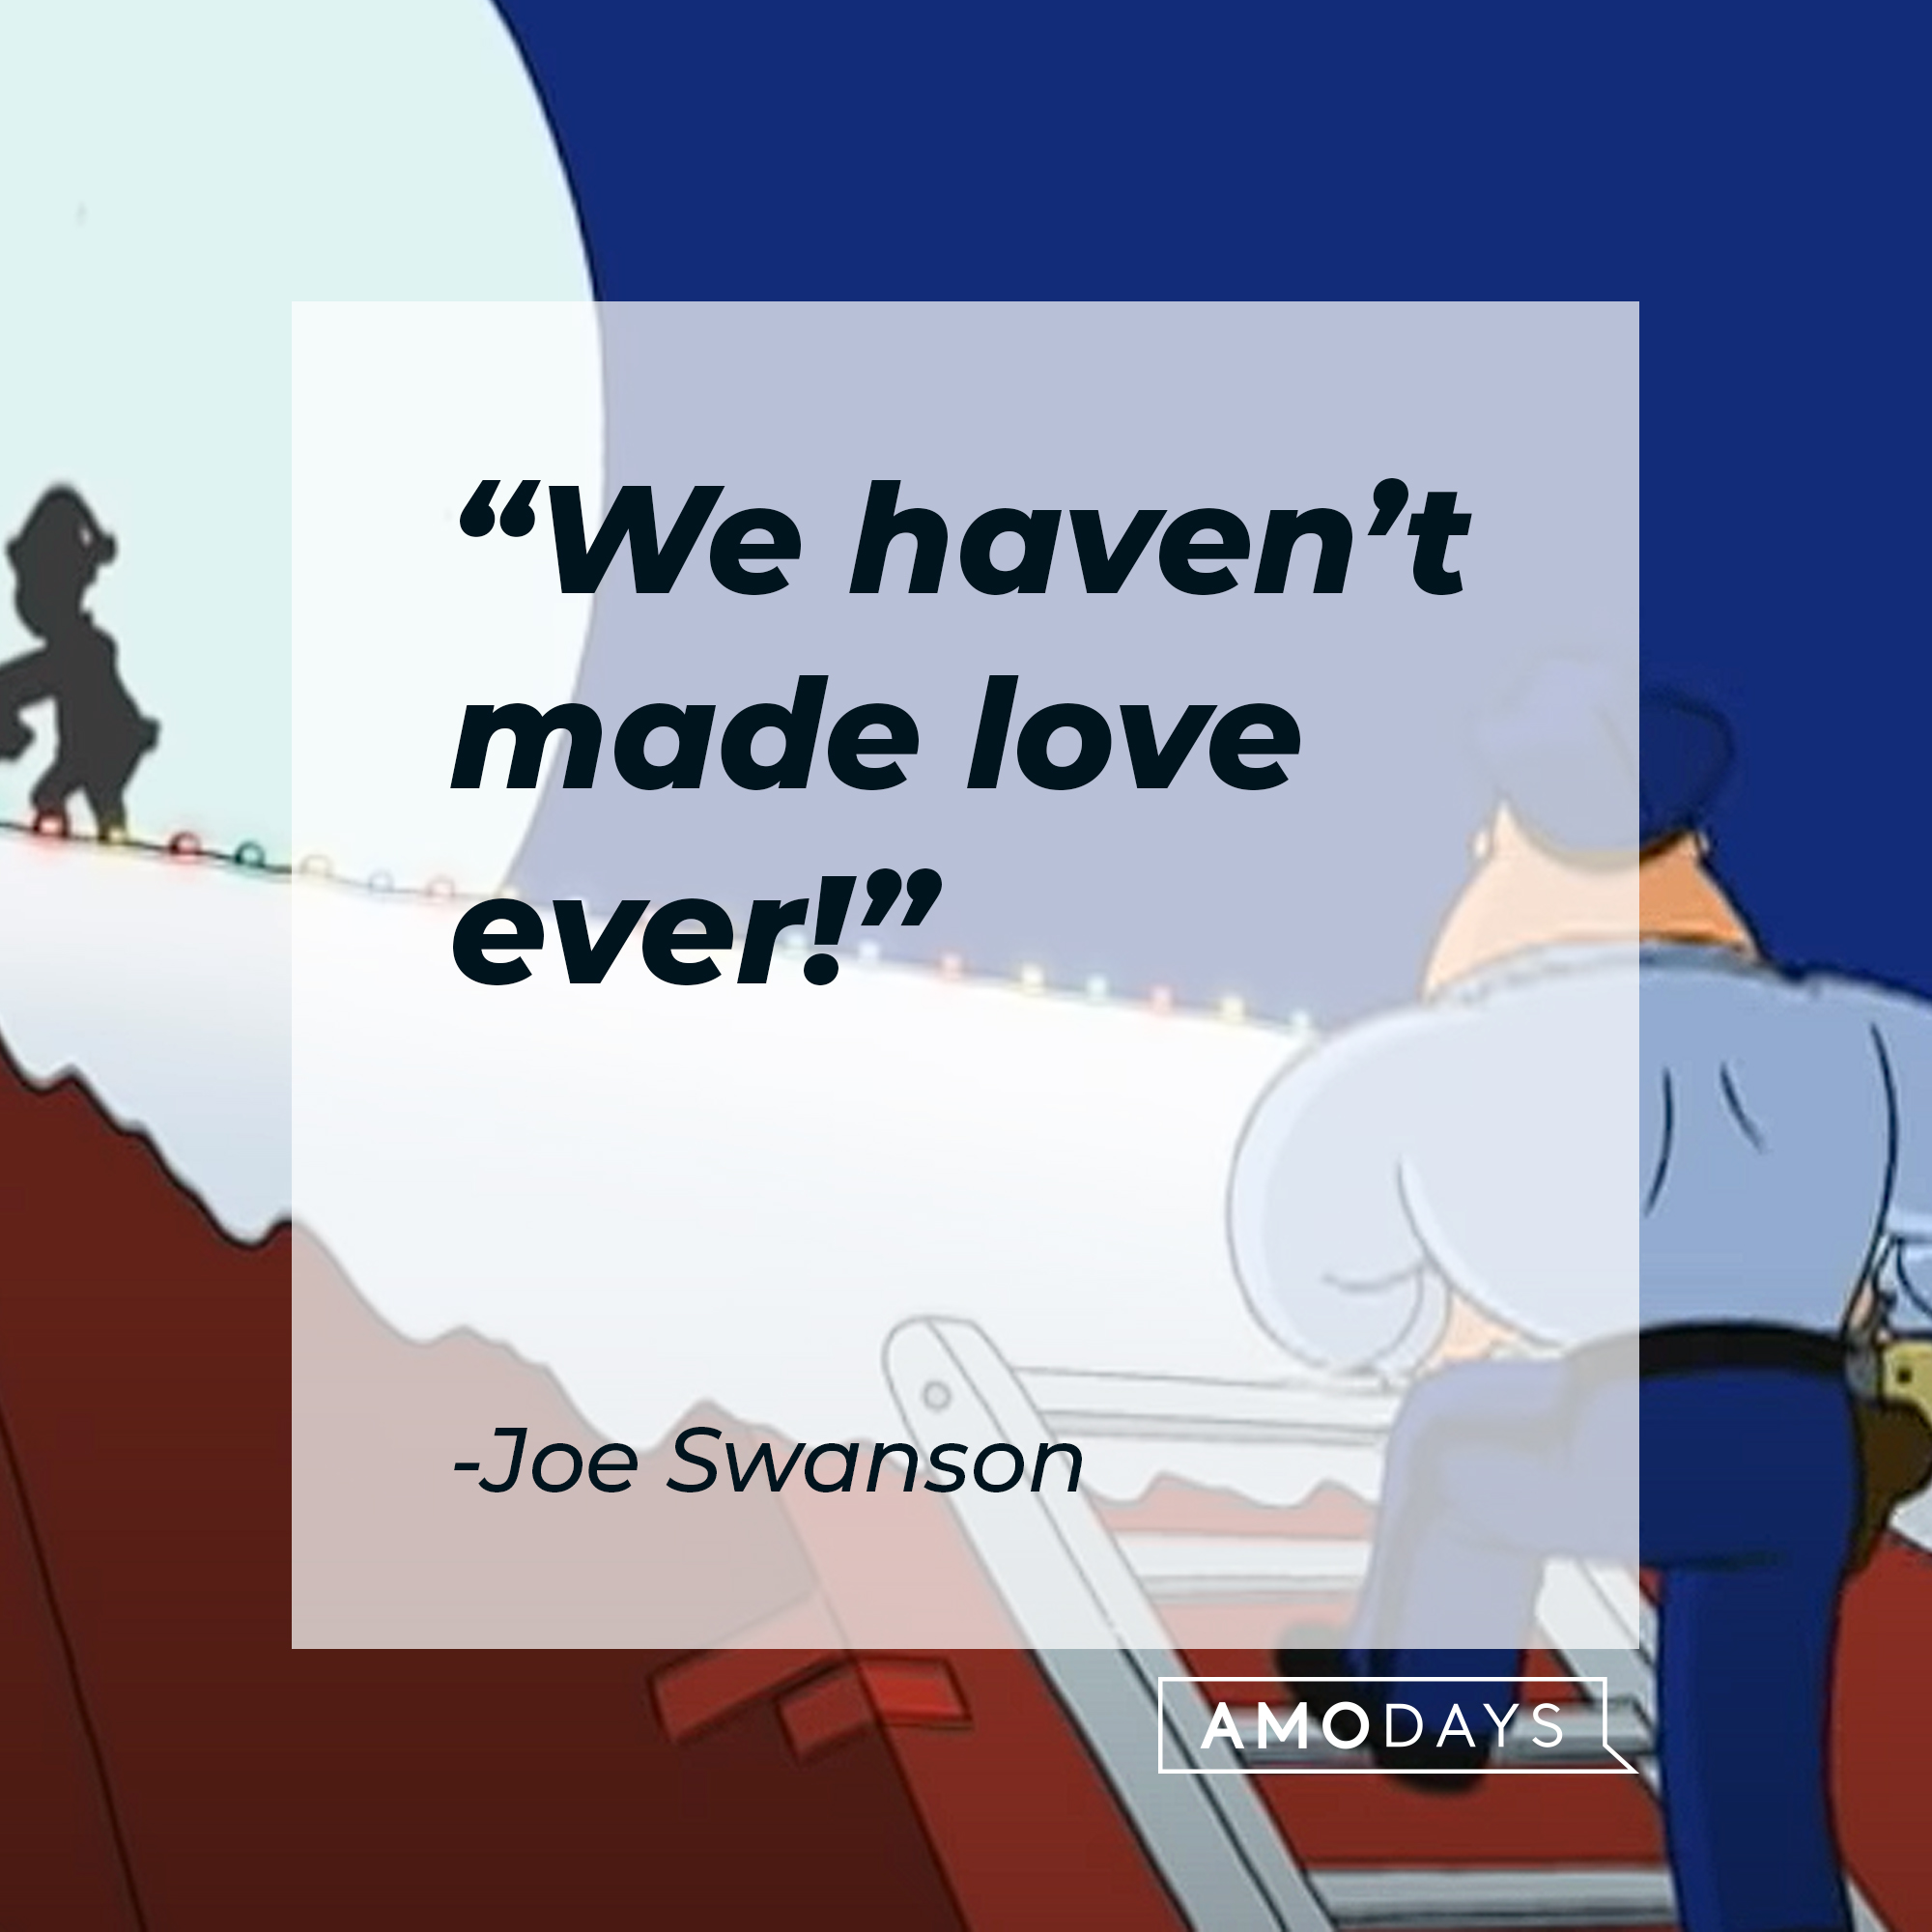 Joe Swanson from "Family Guy" with his quote: “We haven’t made love ever!” | Source: YouTube.com/TBS